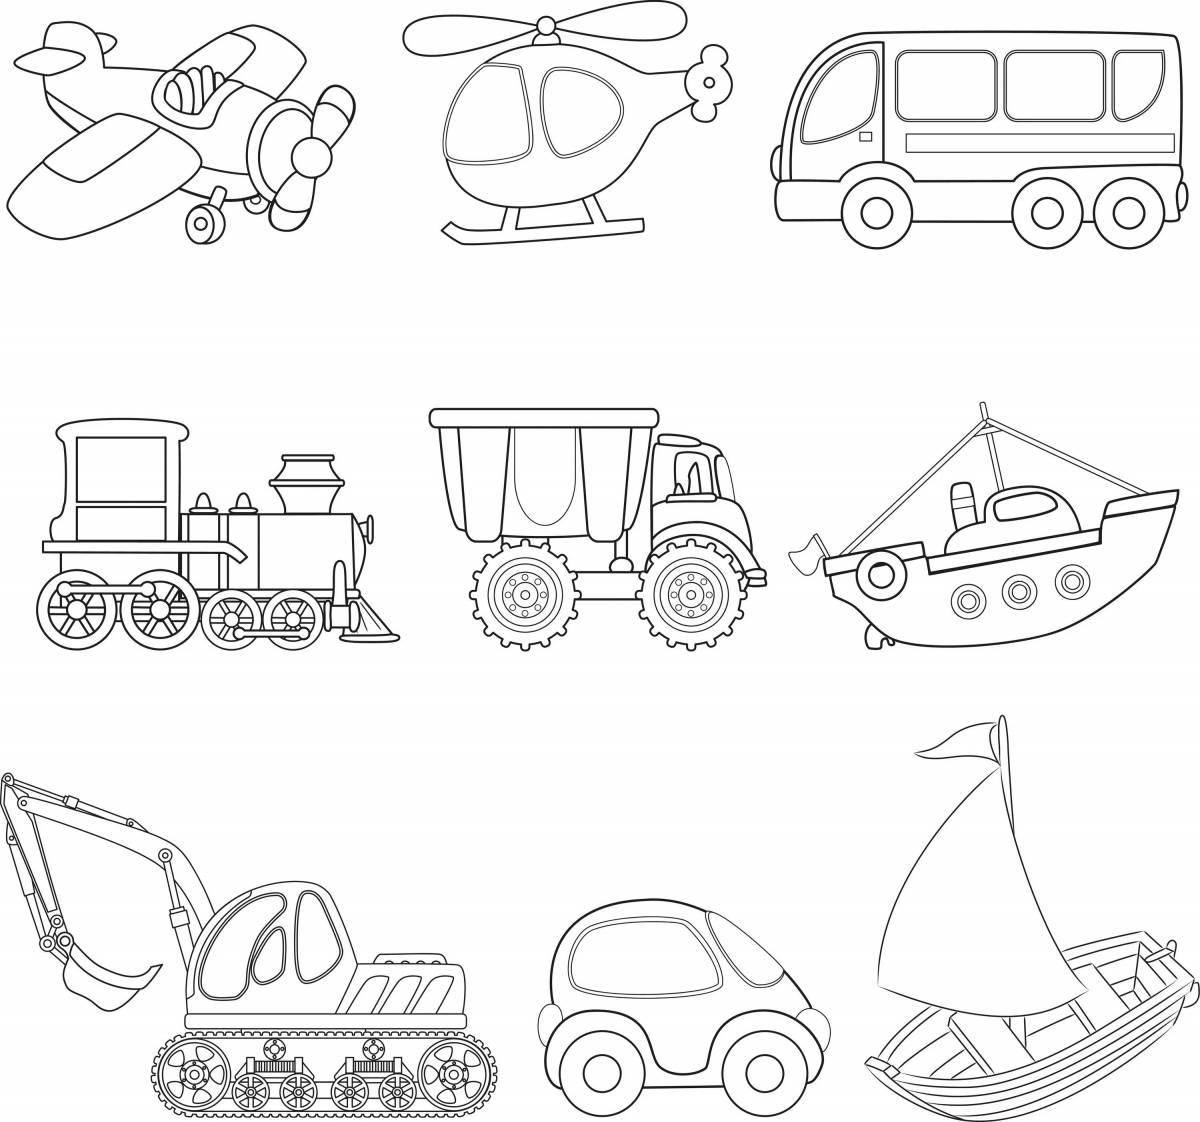 Coloring book for preschoolers modes of transport